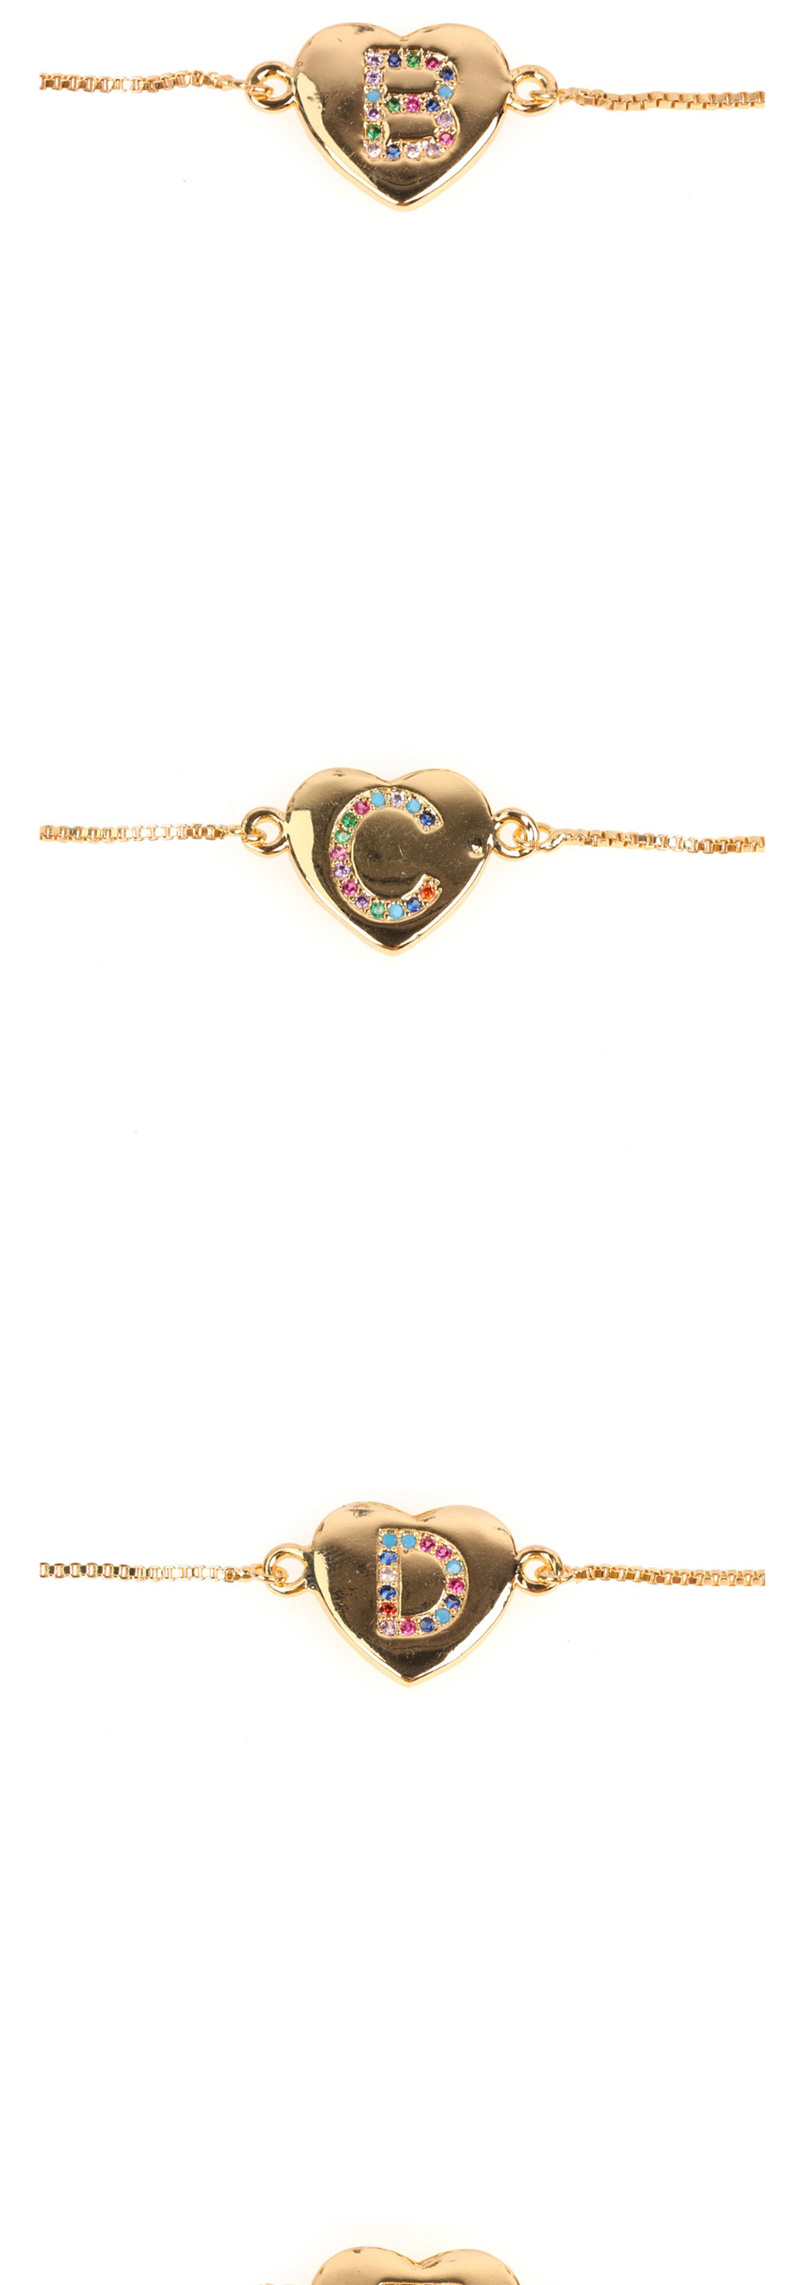 Fashion N Gold Heart Bracelet With Diamonds And Letters,Bracelets